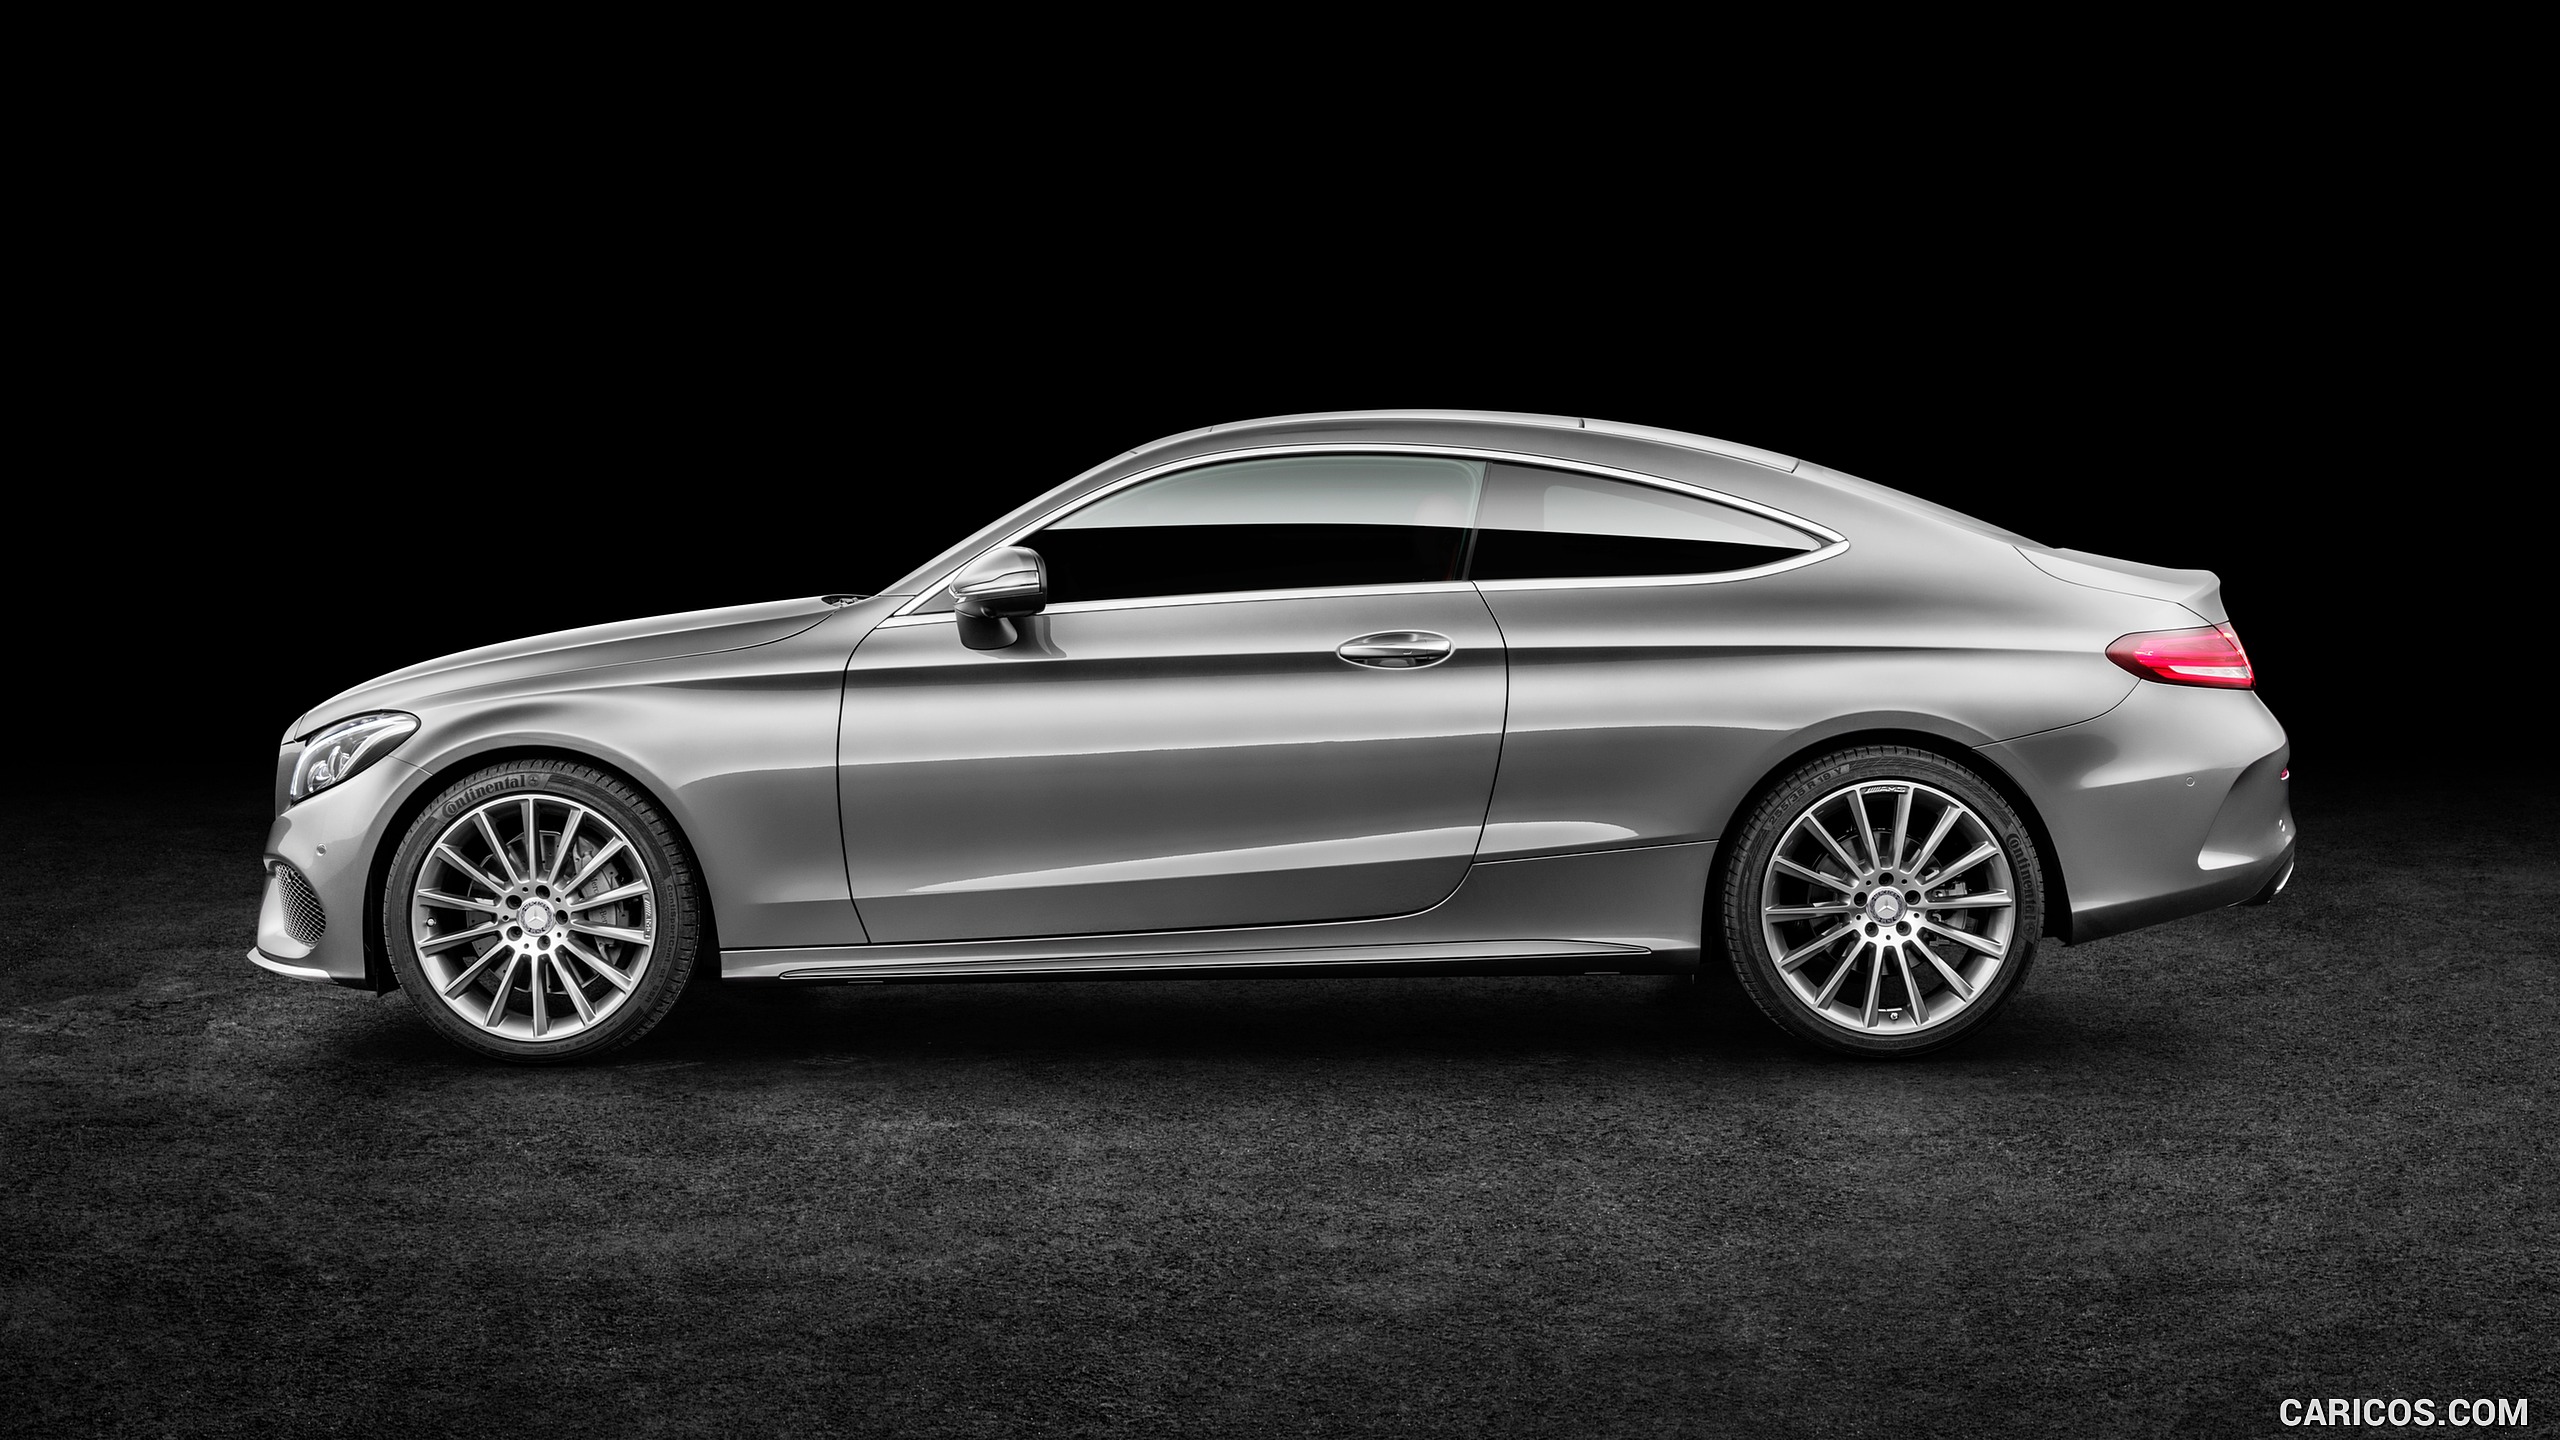 2017 Mercedes-Benz C-Class Coupe C300 (Selenit Grey) - , #32 of 210